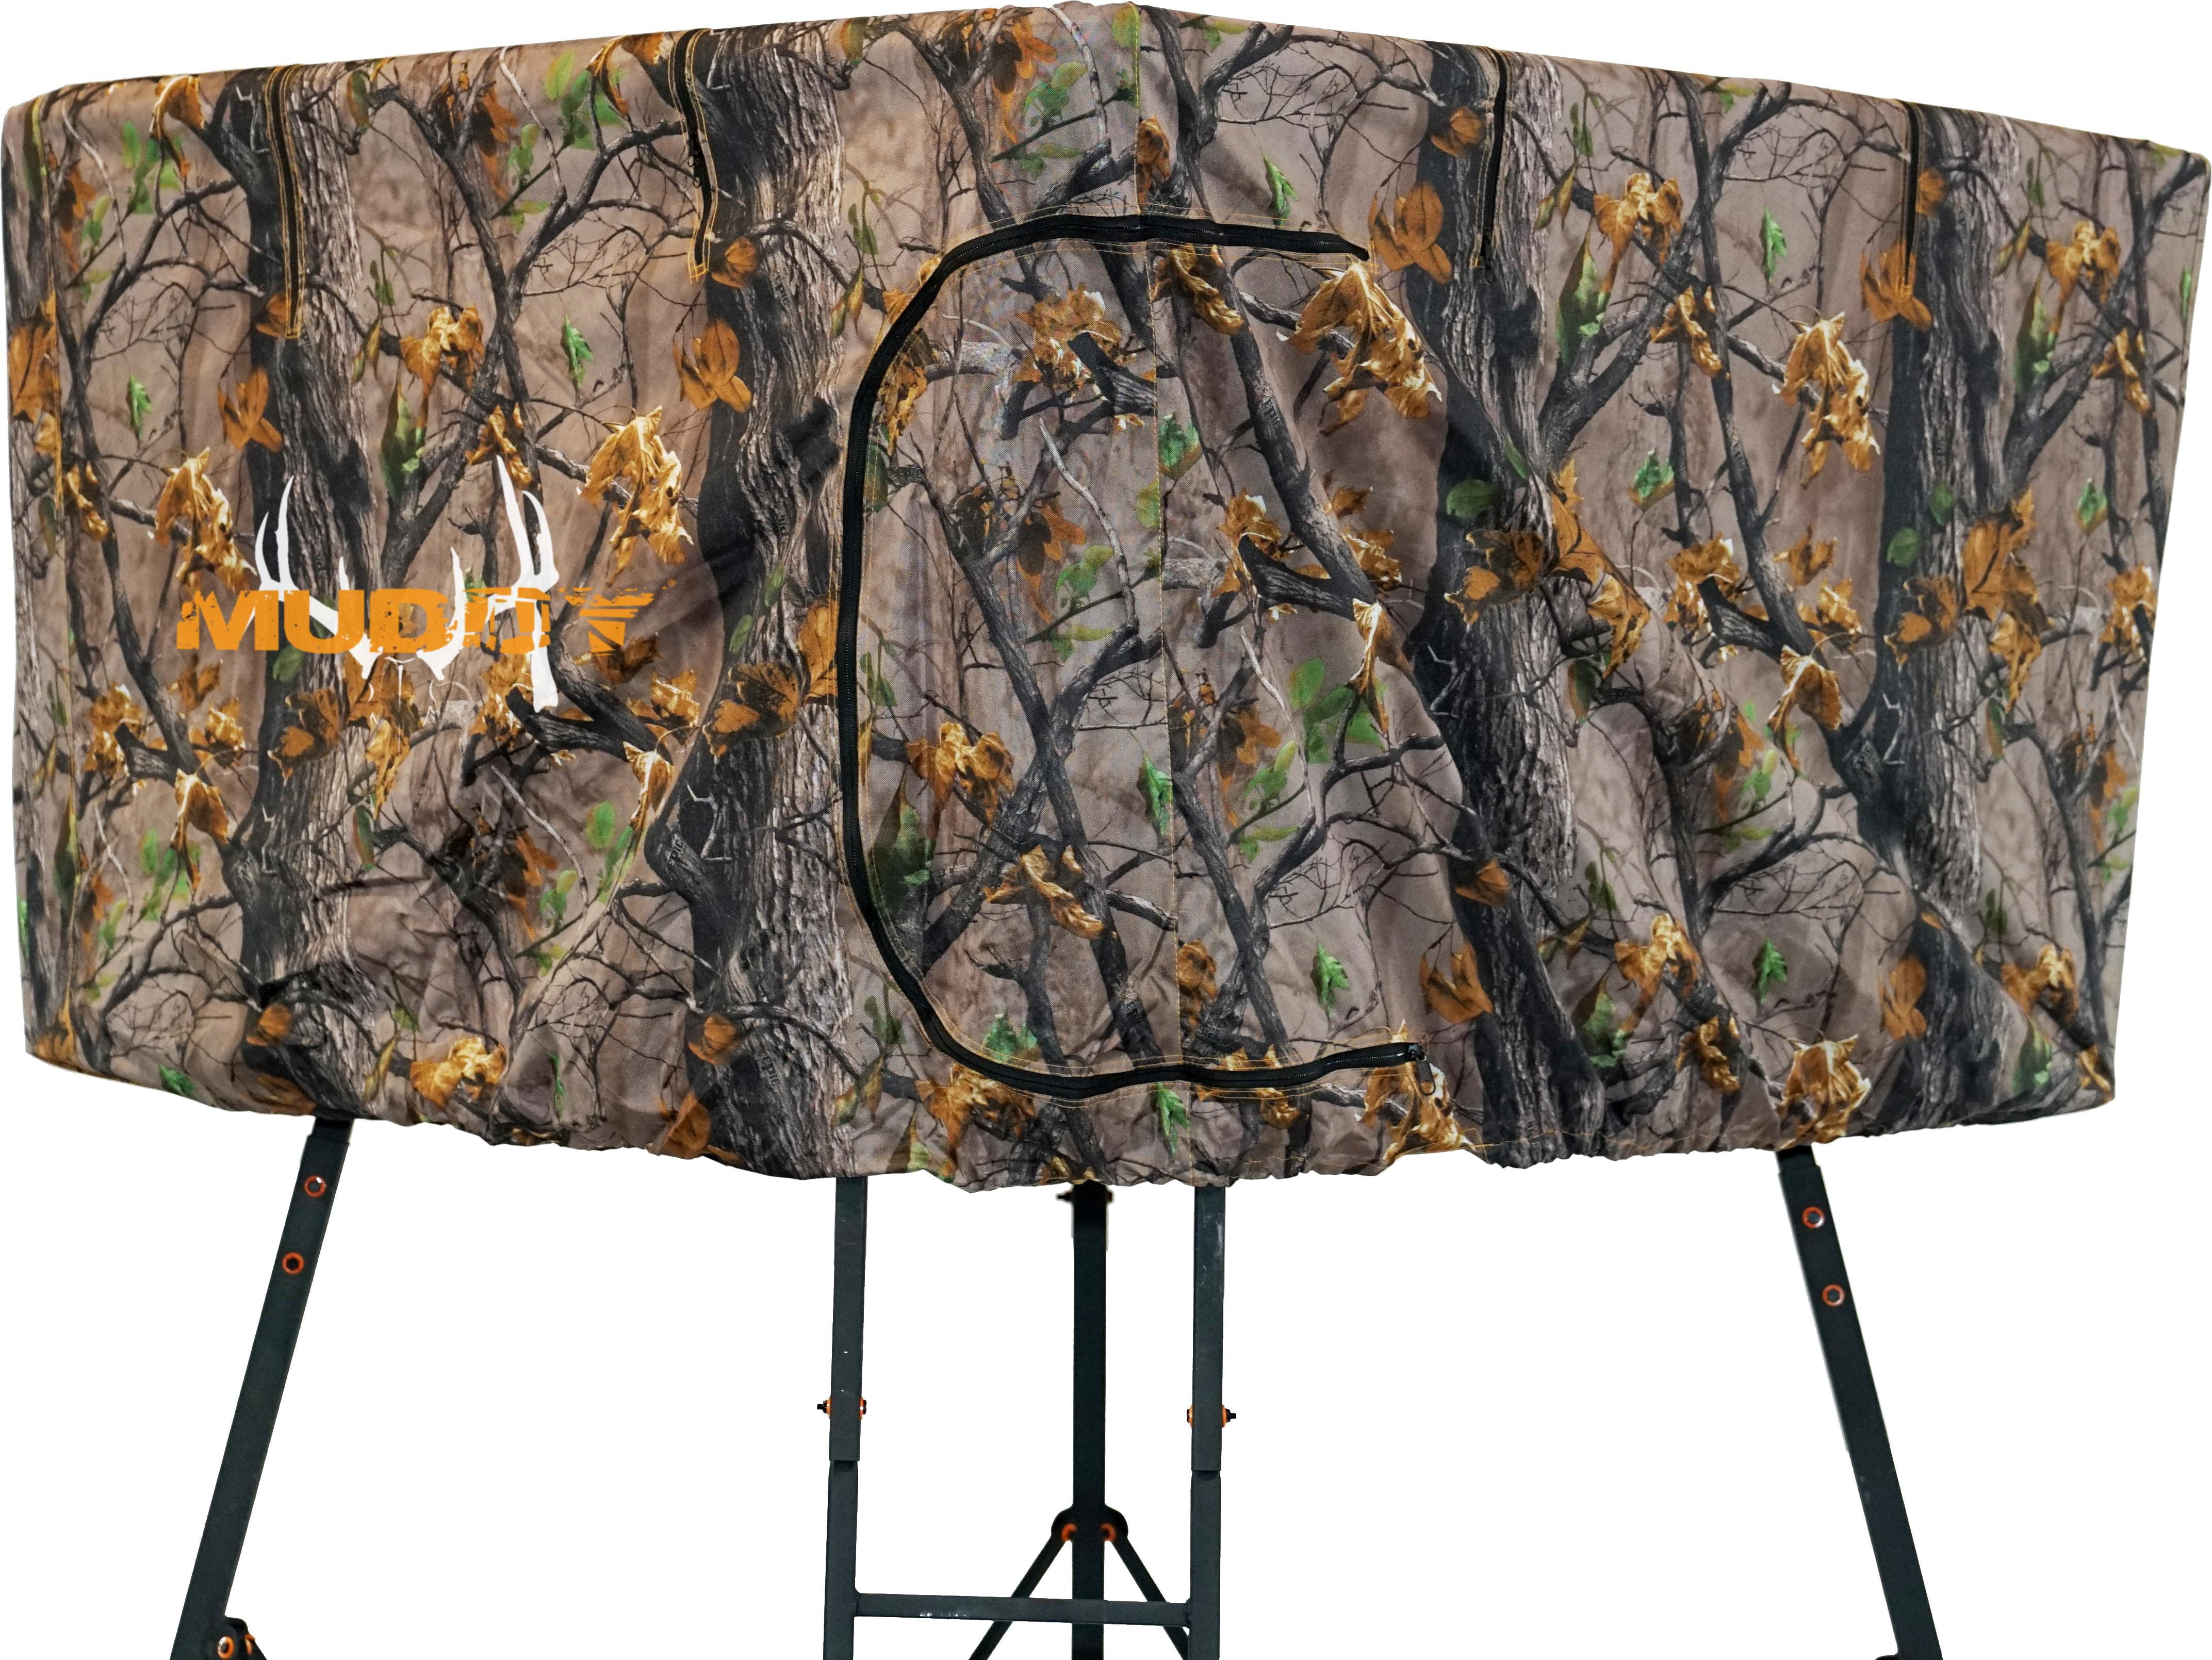 Details about   Rhino Blinds Rhino 50 Realtree Edge 1-Person Pop-Up Spring Turkey Hunting Blind 